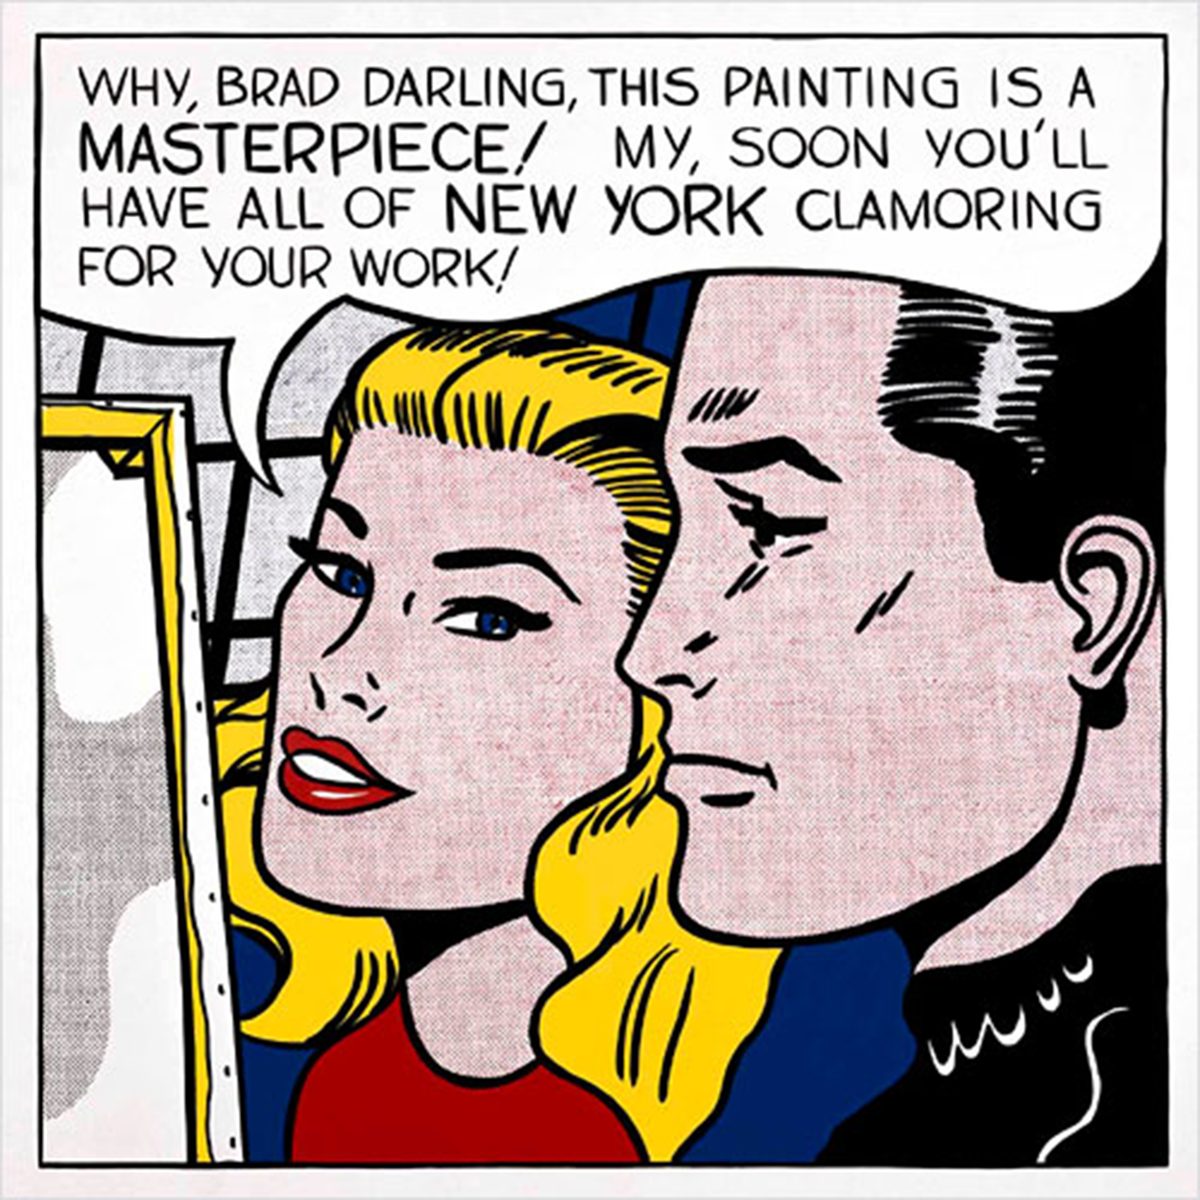 A painting titled “Masterpiece” by Roy Lichtenstein, created in 1962. The image features a closely cropped scene of a blond woman and men in a blue suit, rendered in Lichtenstein's signature comic book style with Ben-Day dots. They are looking at a canvas. The woman's words are captured in a speech bubble above them that reads, “Why, Brad darling, this painting is a Masterpiece! My, soon you'll have all of New York clamoring for your work!”